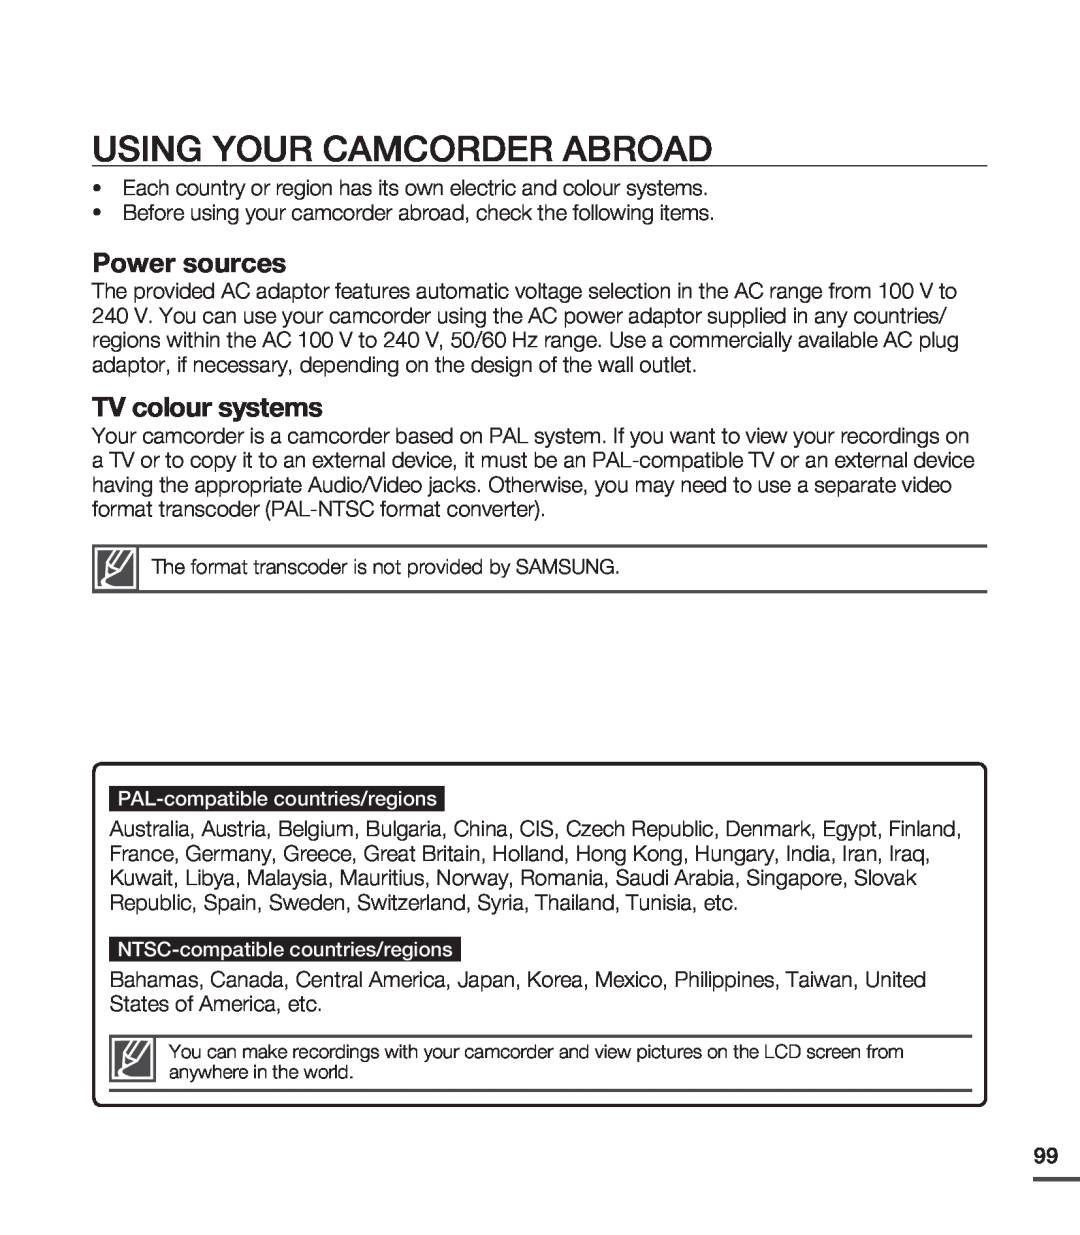 Samsung SMX-C24RP/XER, SMX-C24BP/EDC, SMX-C200LP/EDC manual Using Your Camcorder Abroad, Power sources, TV colour systems 